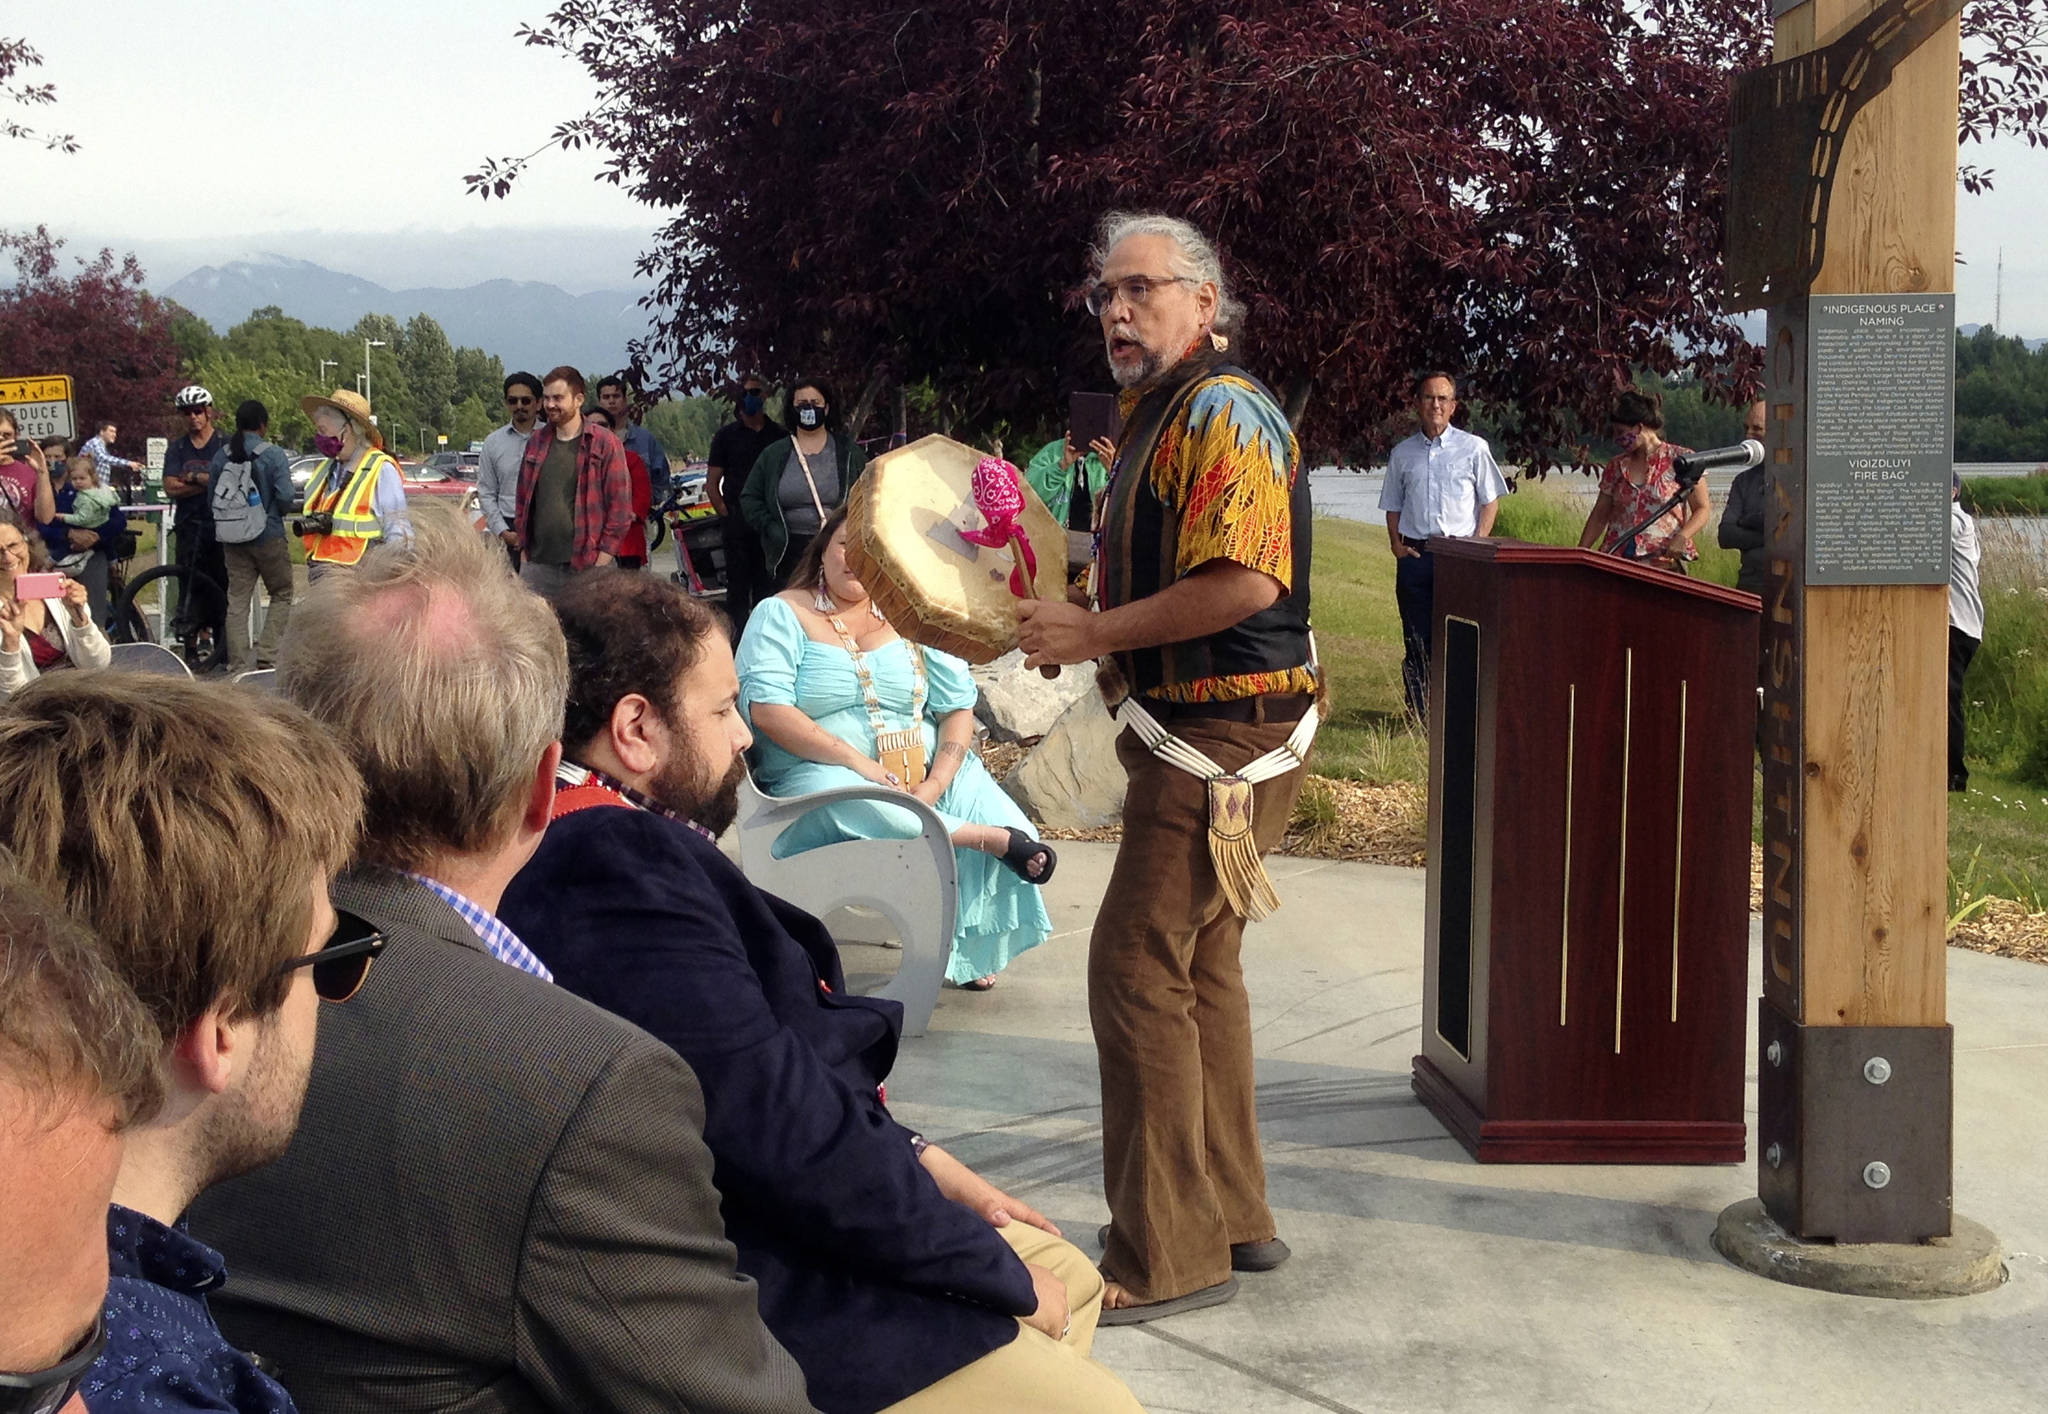 Athabascan singer and storyteller George Holly, performs at the unveiling of a place-name marker at Chanshtnu, or “grassy creek,” the Dena’ina Athabascan name for Westchester Lagoon, on Tuesday, Aug. 3, 2021, in Anchorage, Alaska. (Joaqlin Estus / Indian Country Today)